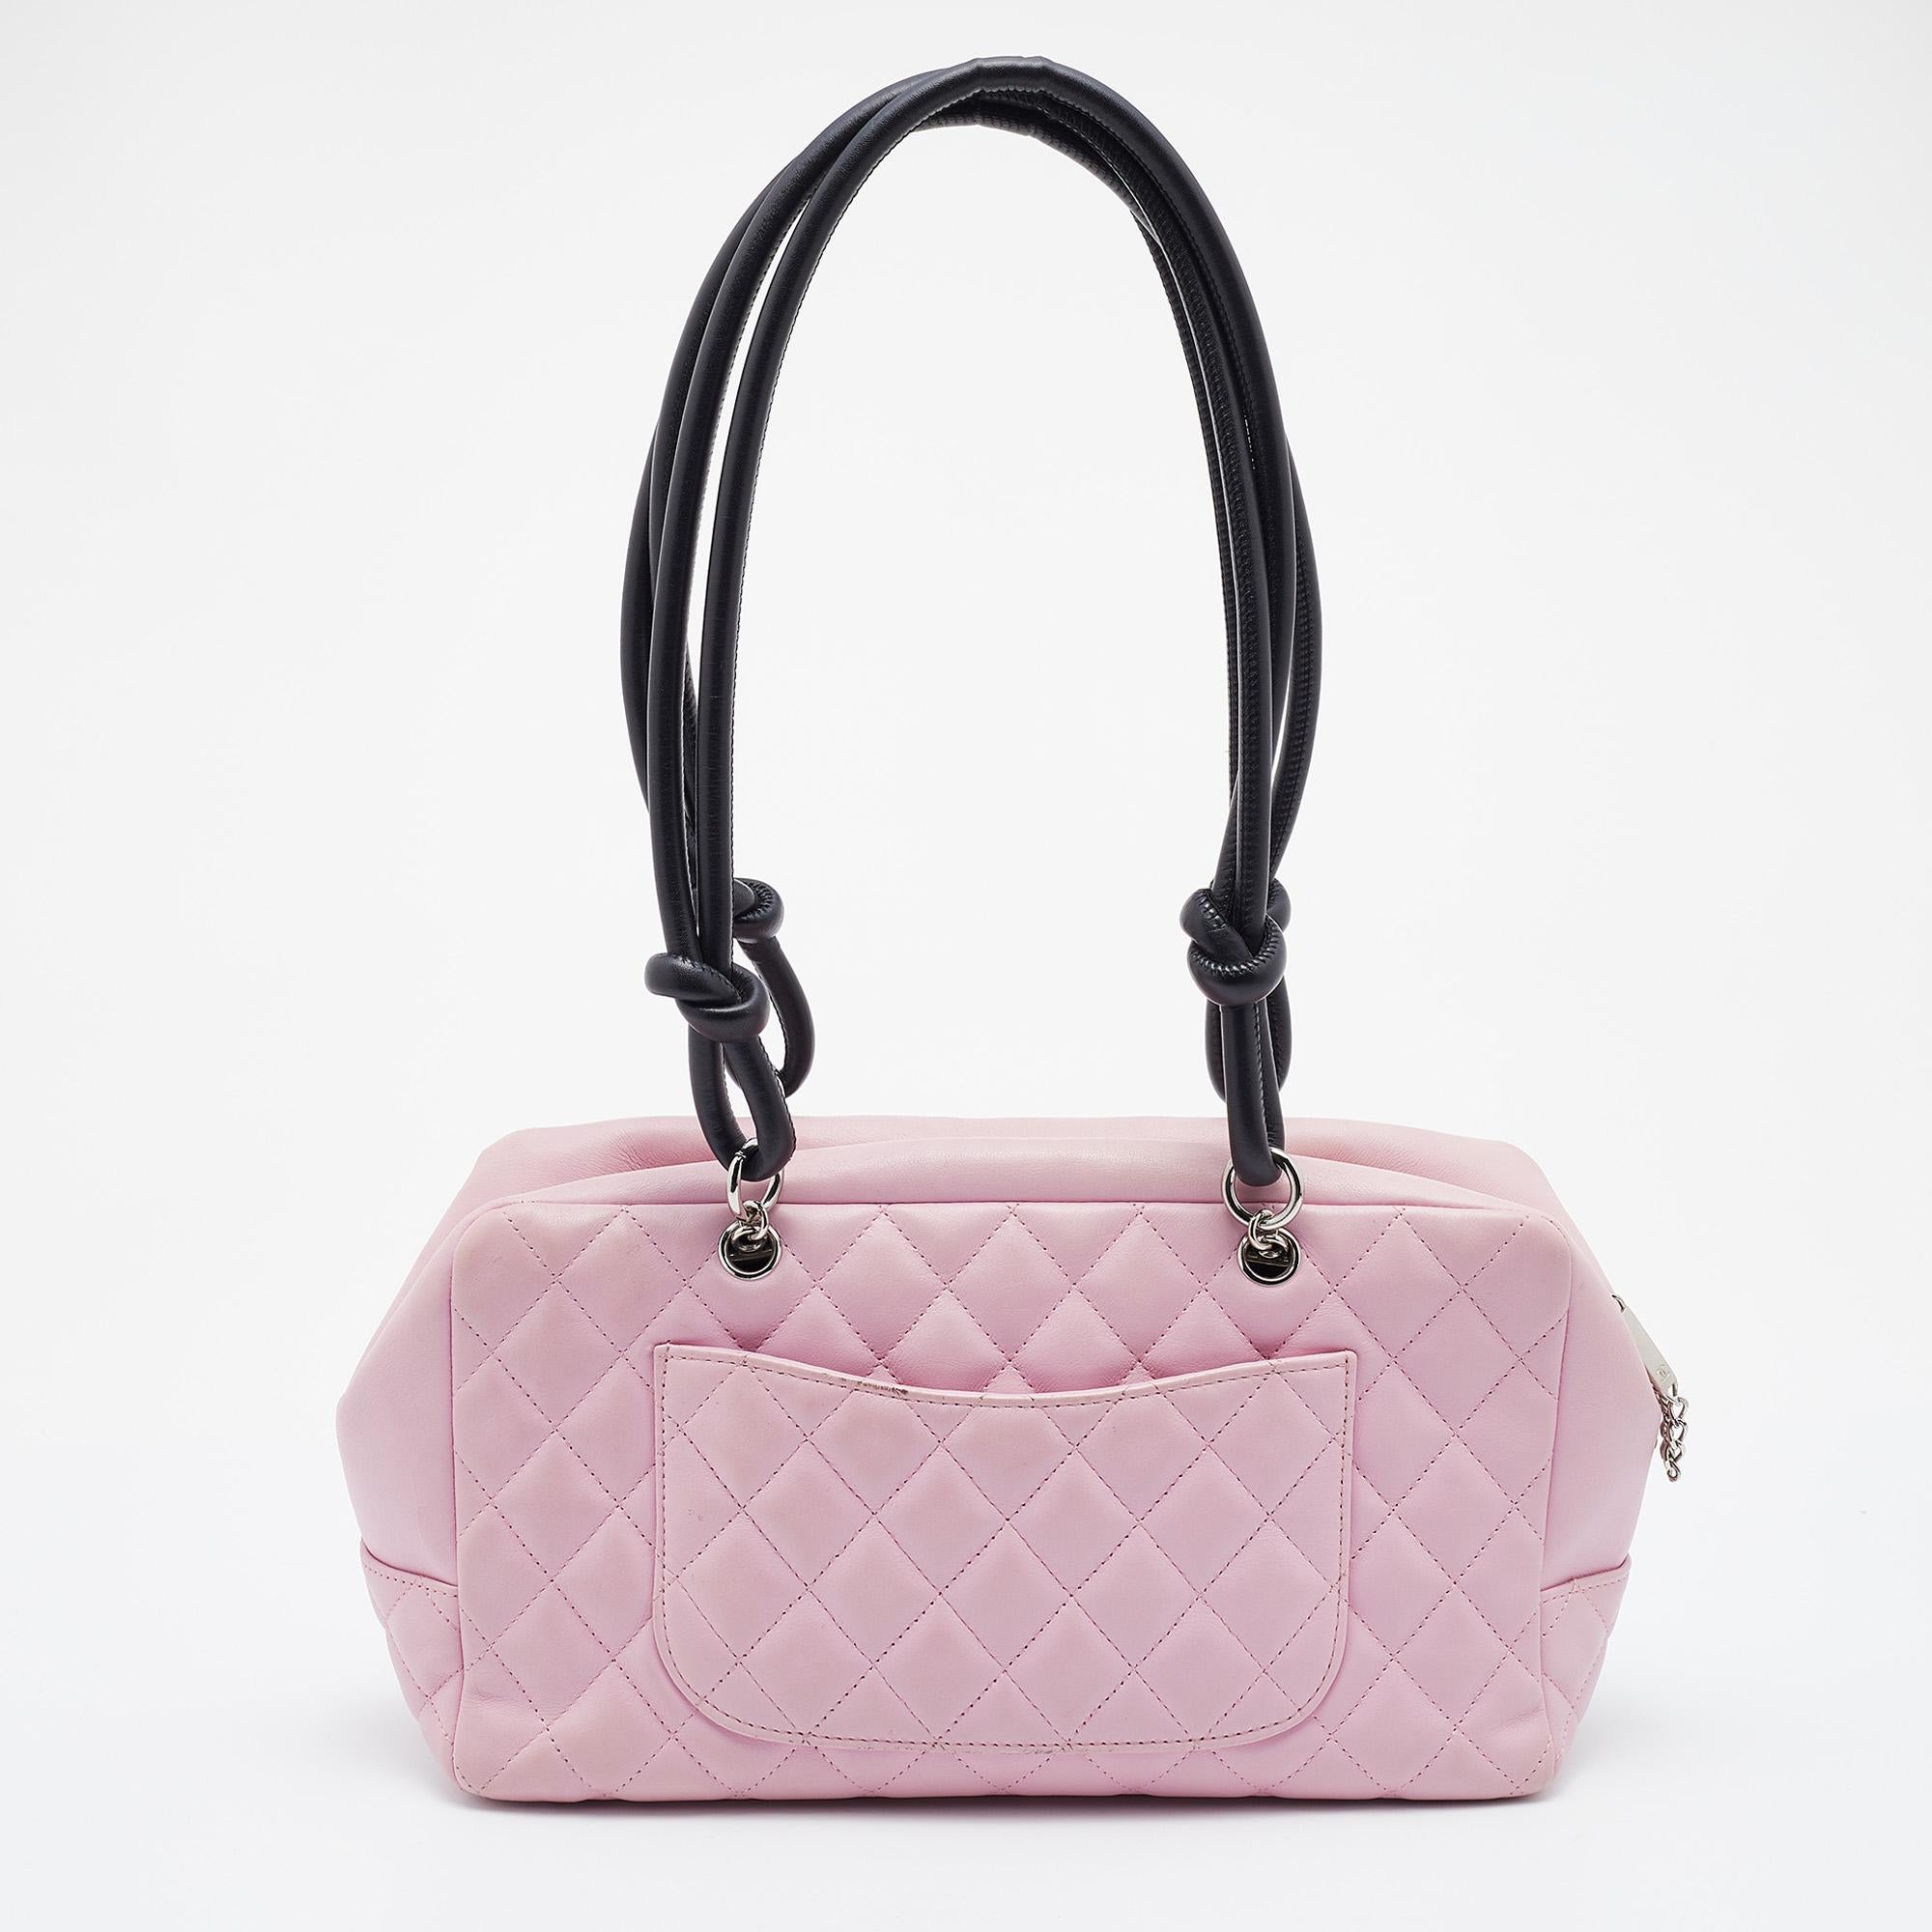 Chanel Pink/Black Quilted Leather CC Ligne Cambon Bag 6